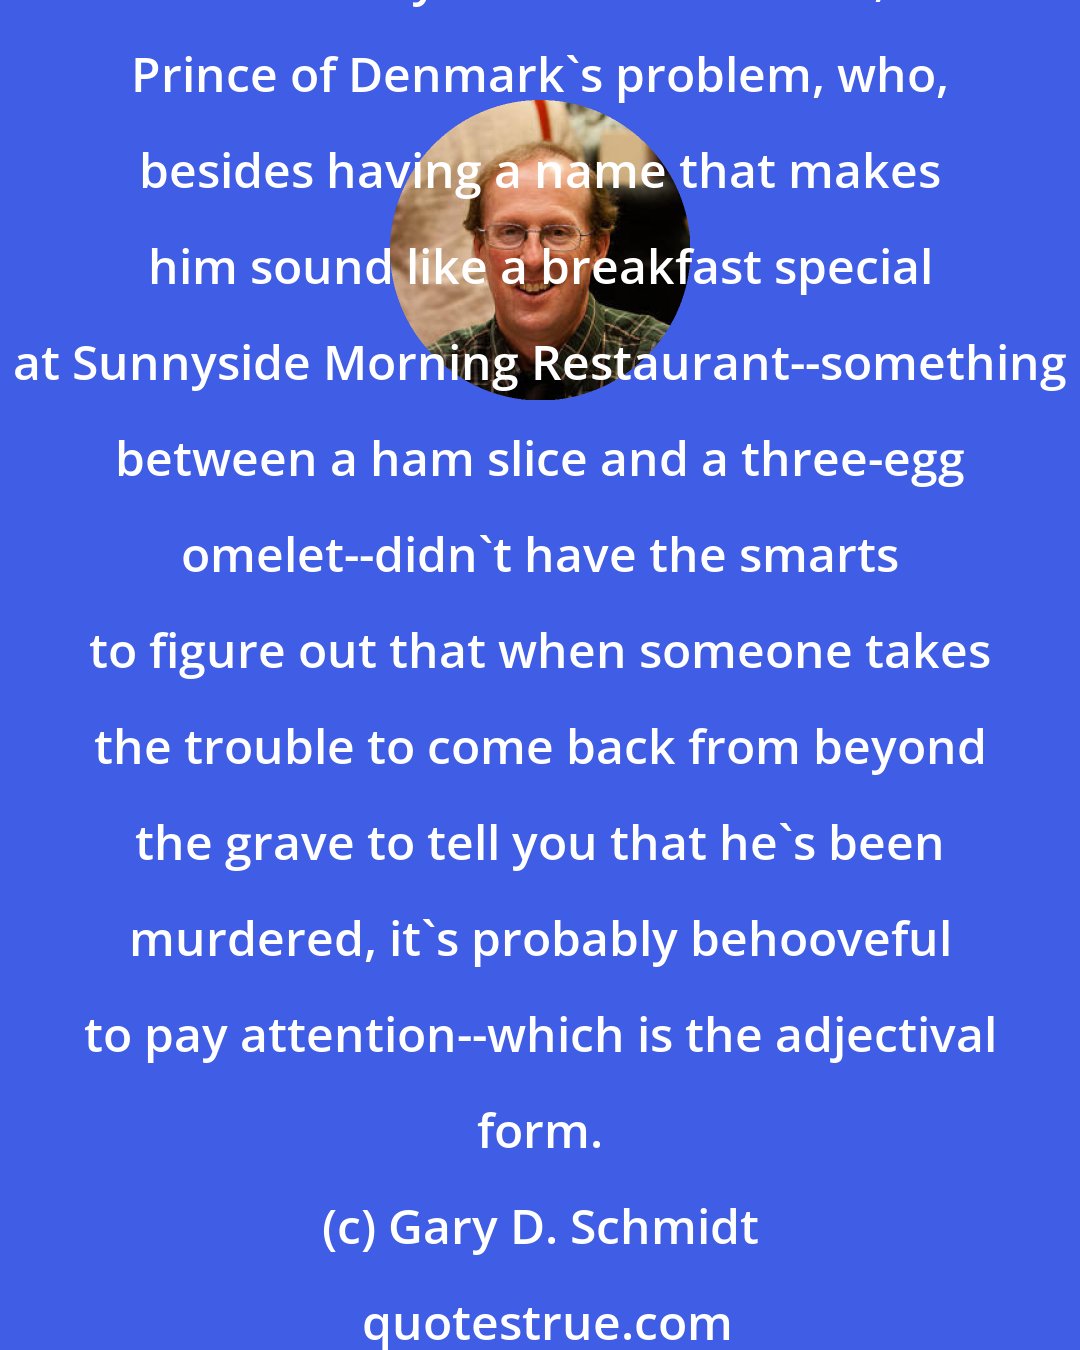 Gary D. Schmidt: I think something must happen to you when you get into eight grade. Like the Doug Swieteck's Brother Gene switches on and you become a jerk. 
Which may have been Hamlet, Prince of Denmark's problem, who, besides having a name that makes him sound like a breakfast special at Sunnyside Morning Restaurant--something between a ham slice and a three-egg omelet--didn't have the smarts to figure out that when someone takes the trouble to come back from beyond the grave to tell you that he's been murdered, it's probably behooveful to pay attention--which is the adjectival form.